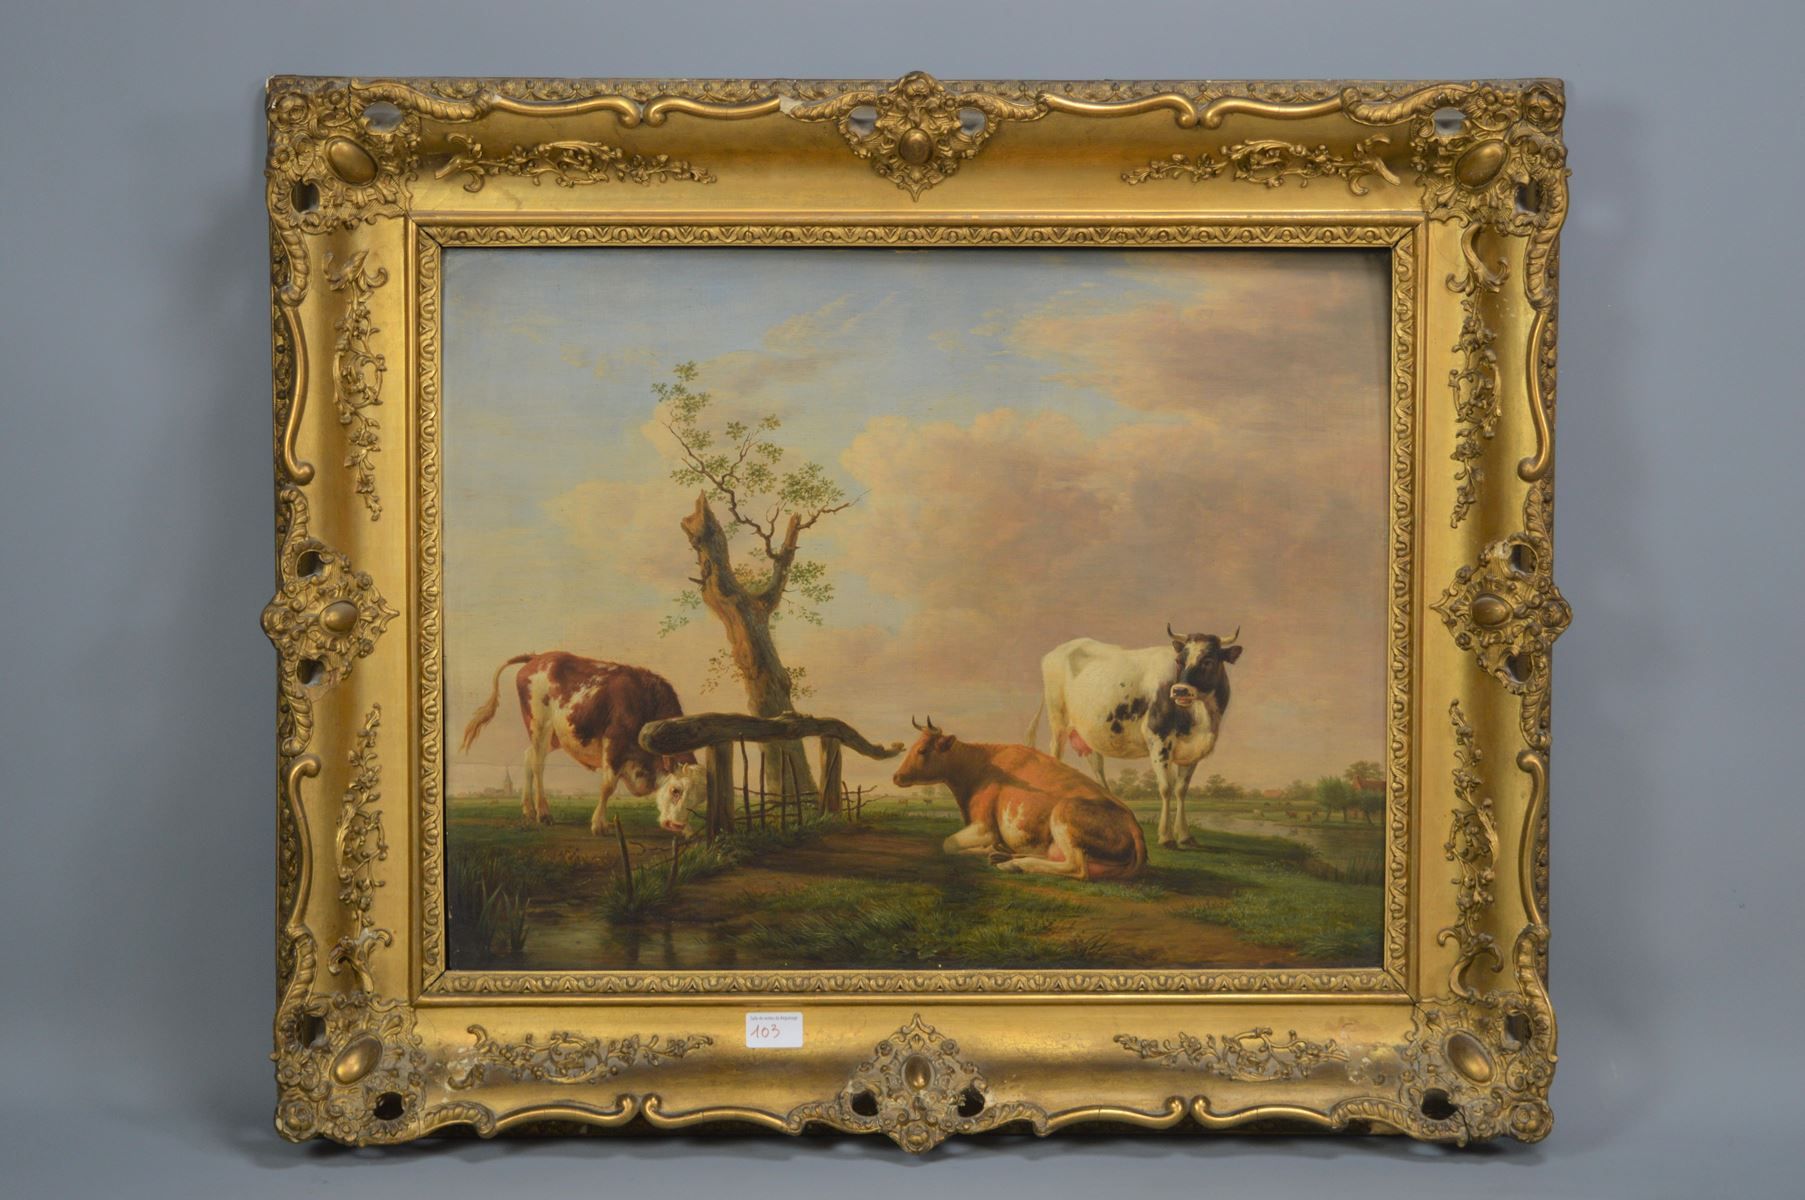 Null HSP, 'The Cows', circa 1850, in the style of Eugene Verboeckhoven, 57x44cm